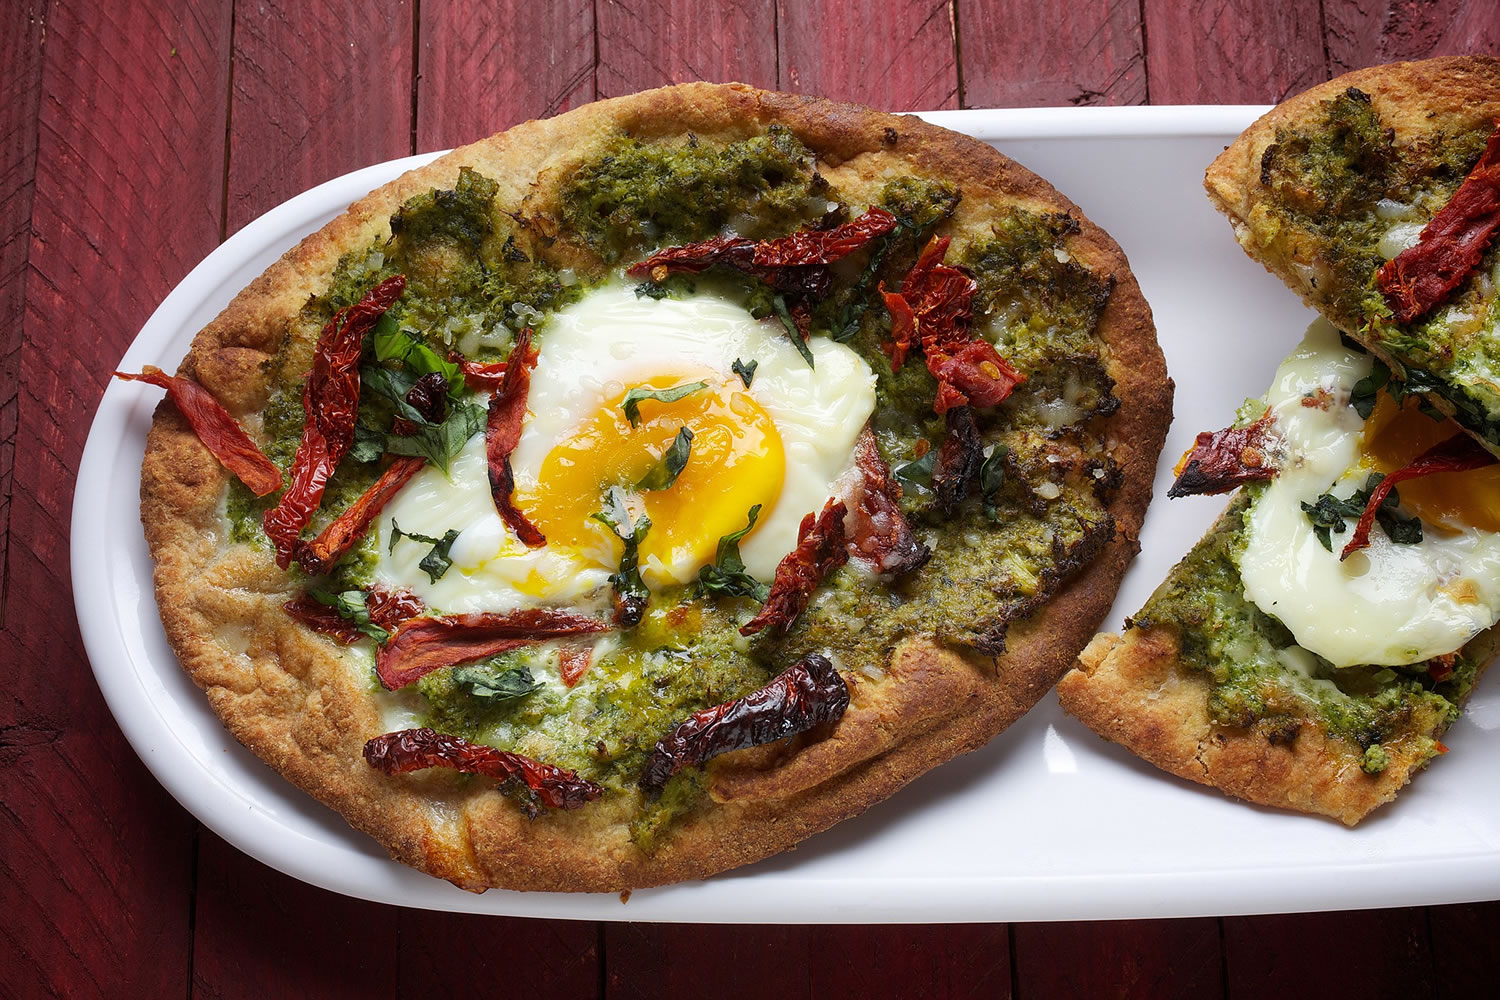 Broccoli pesto is used as the base a flatbread pizza that also features sun-dried tomatoes and an egg cooked to runny perfection.